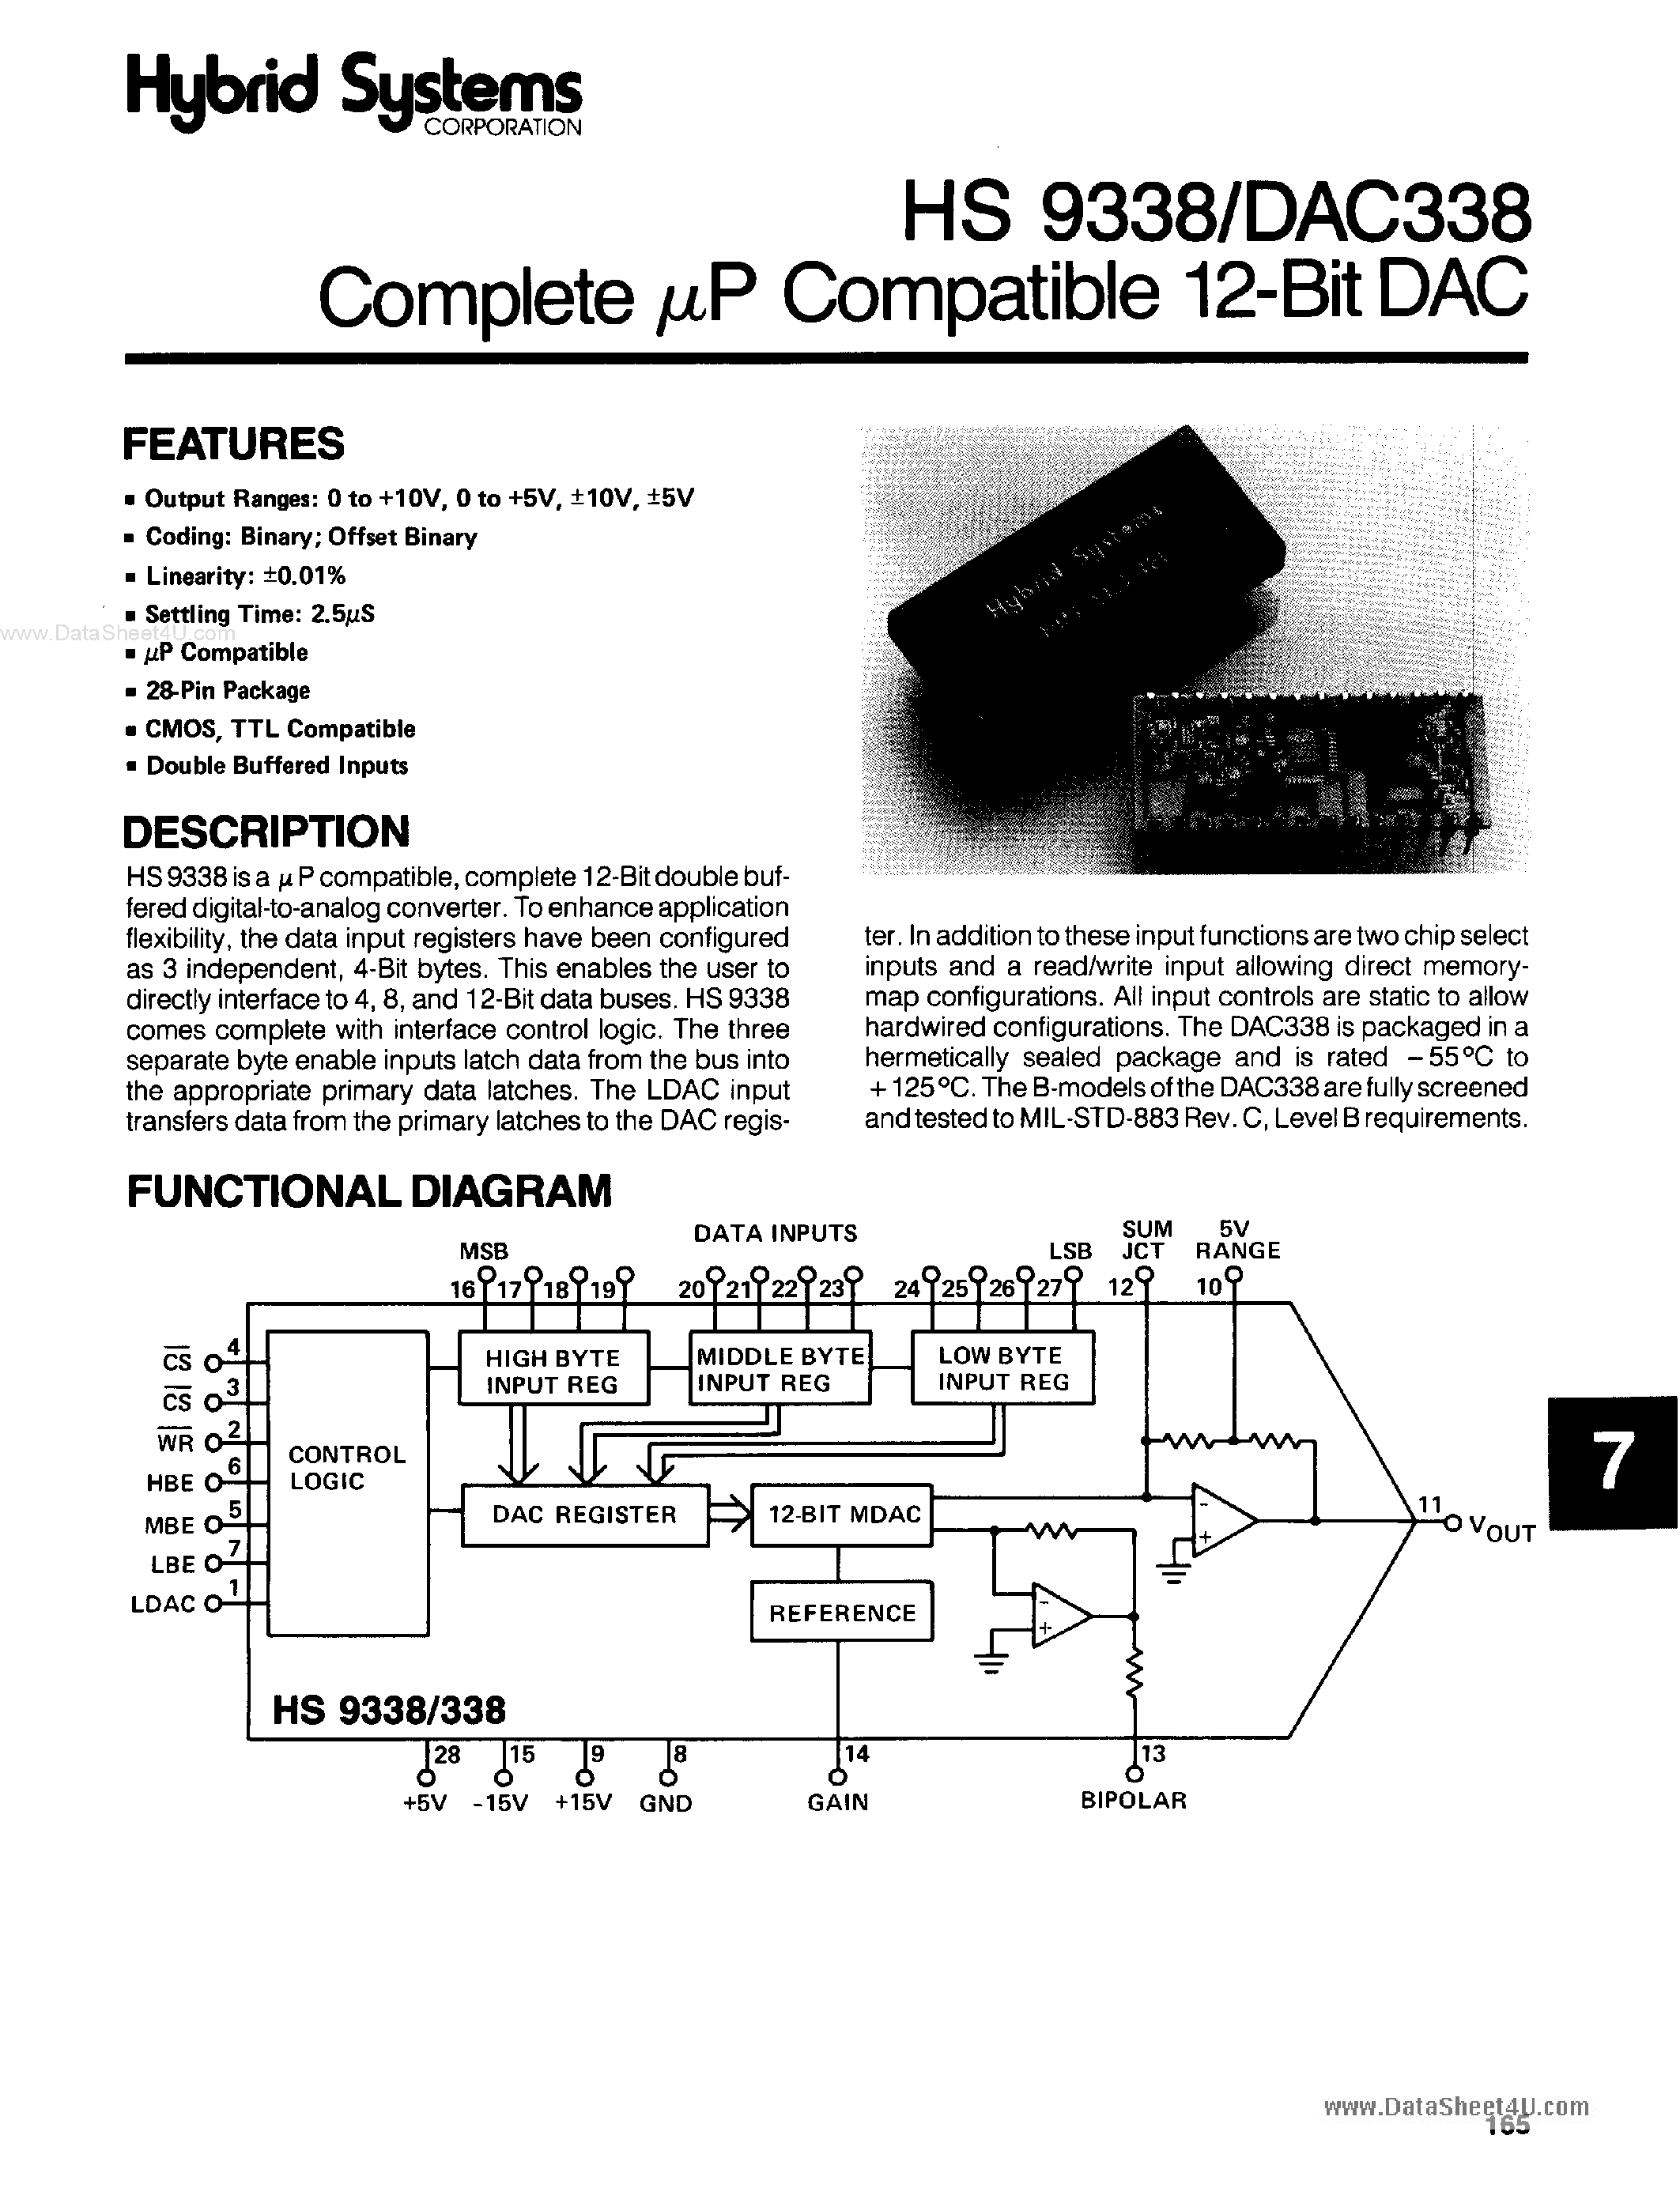 Datasheet DAC338 - Complete uP Compatible 12-Bit DAC page 1